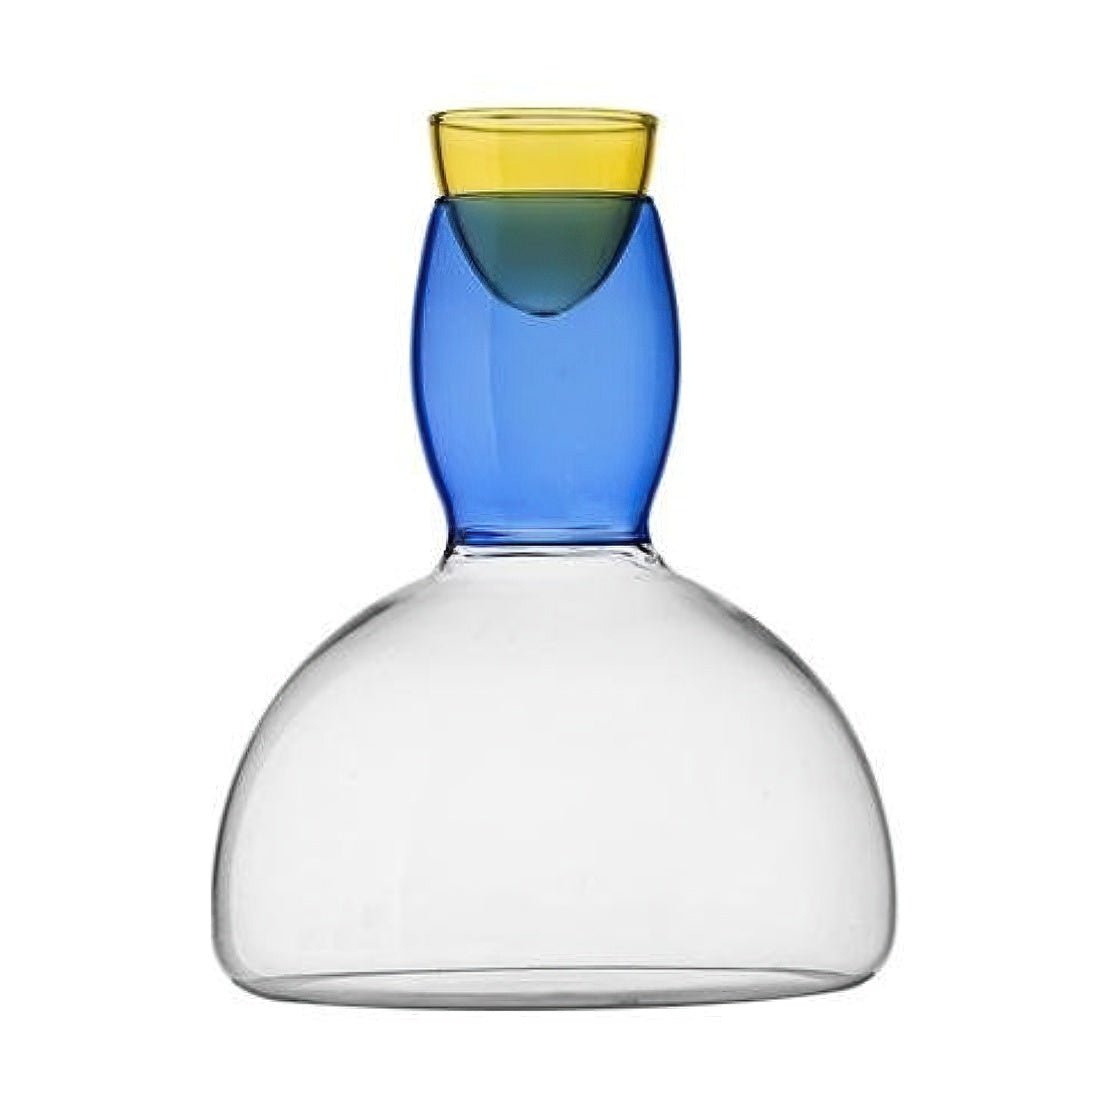 Glassware drinking can with blue and yellow top.